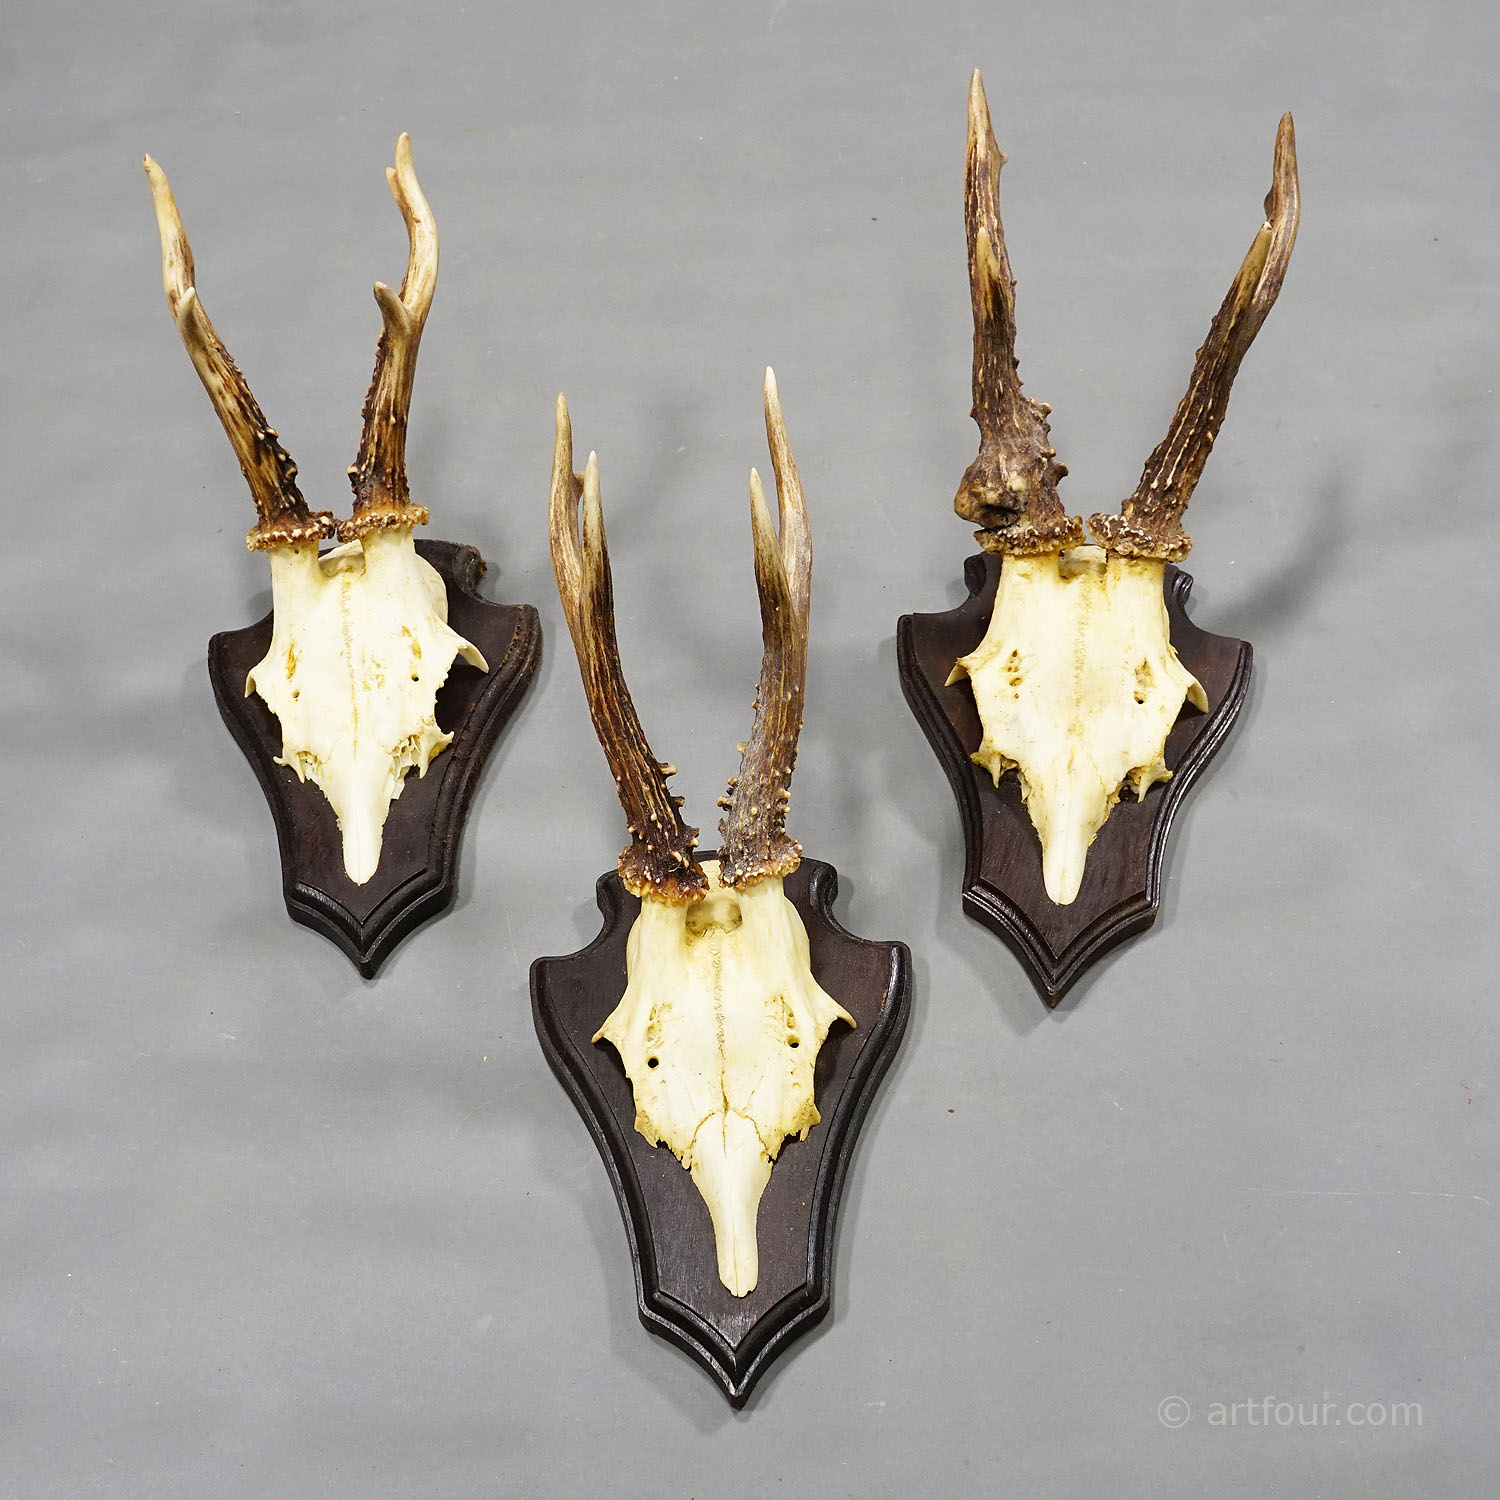 Six Large Vintage Deer Trophies on Wooden Plaques Germany ca. 1970s - 80s